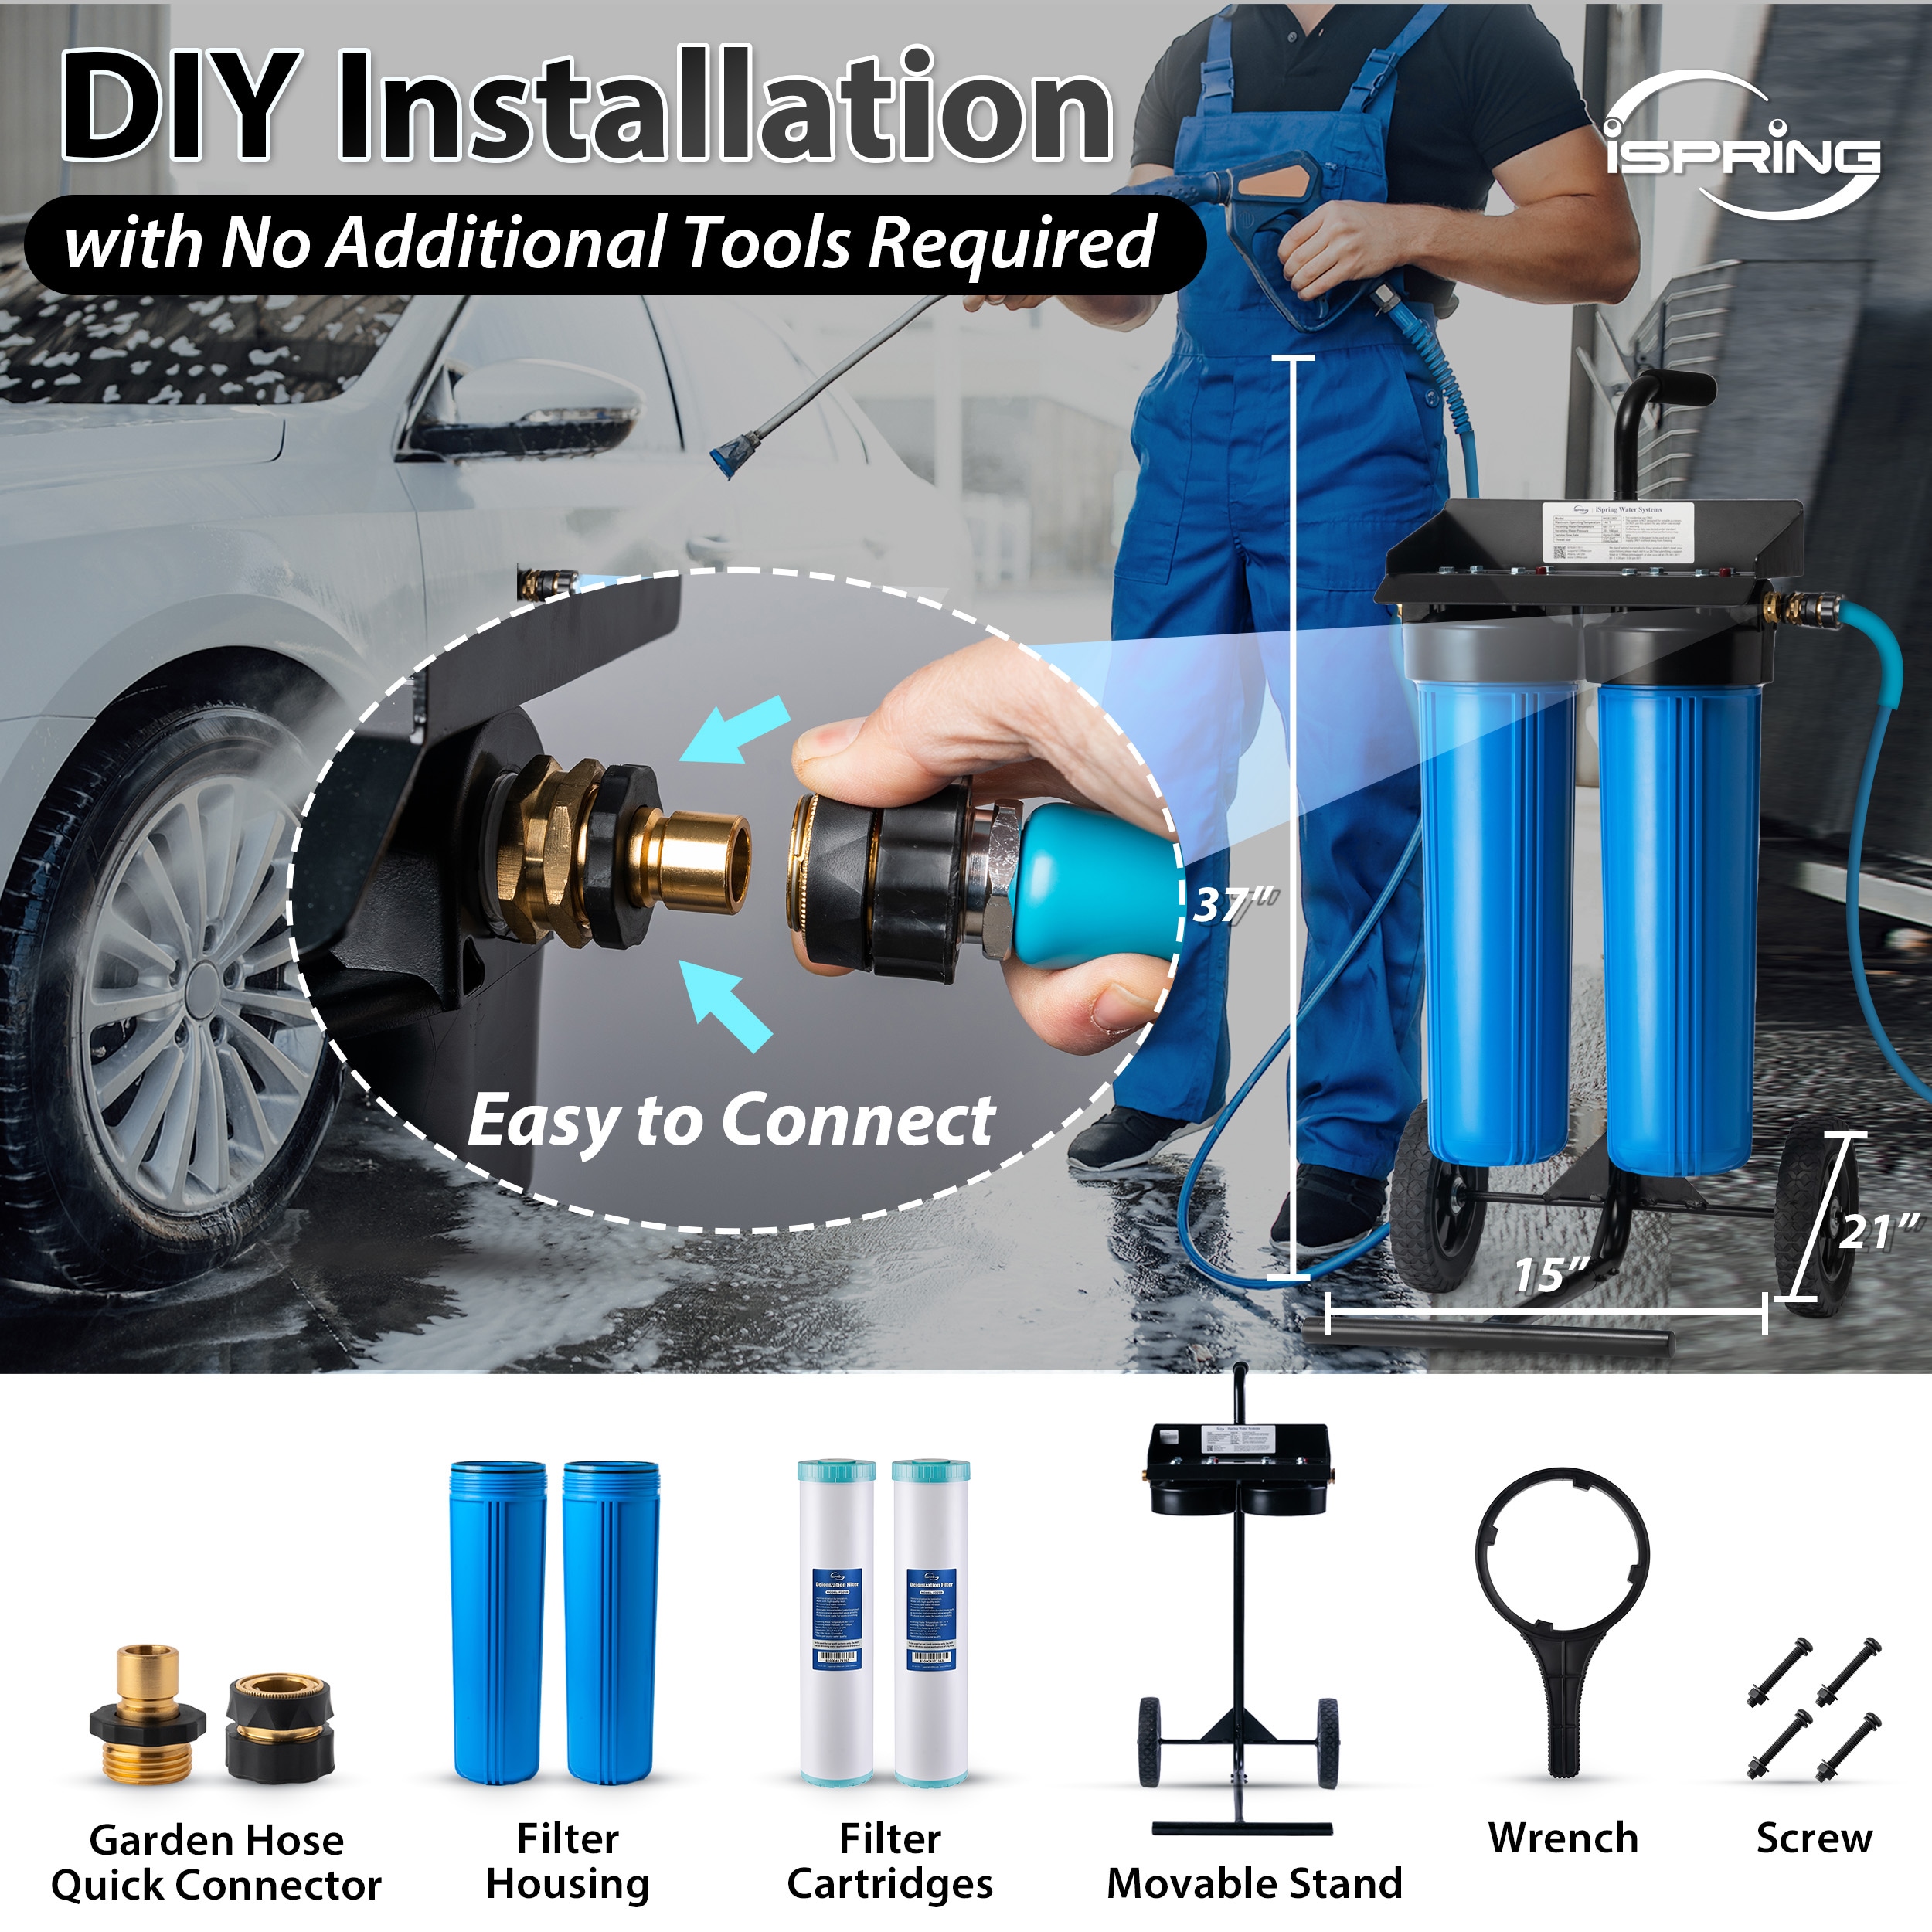 Spot Free Car Wash Rinse at Home -Standard Deionized Water Hose Filter